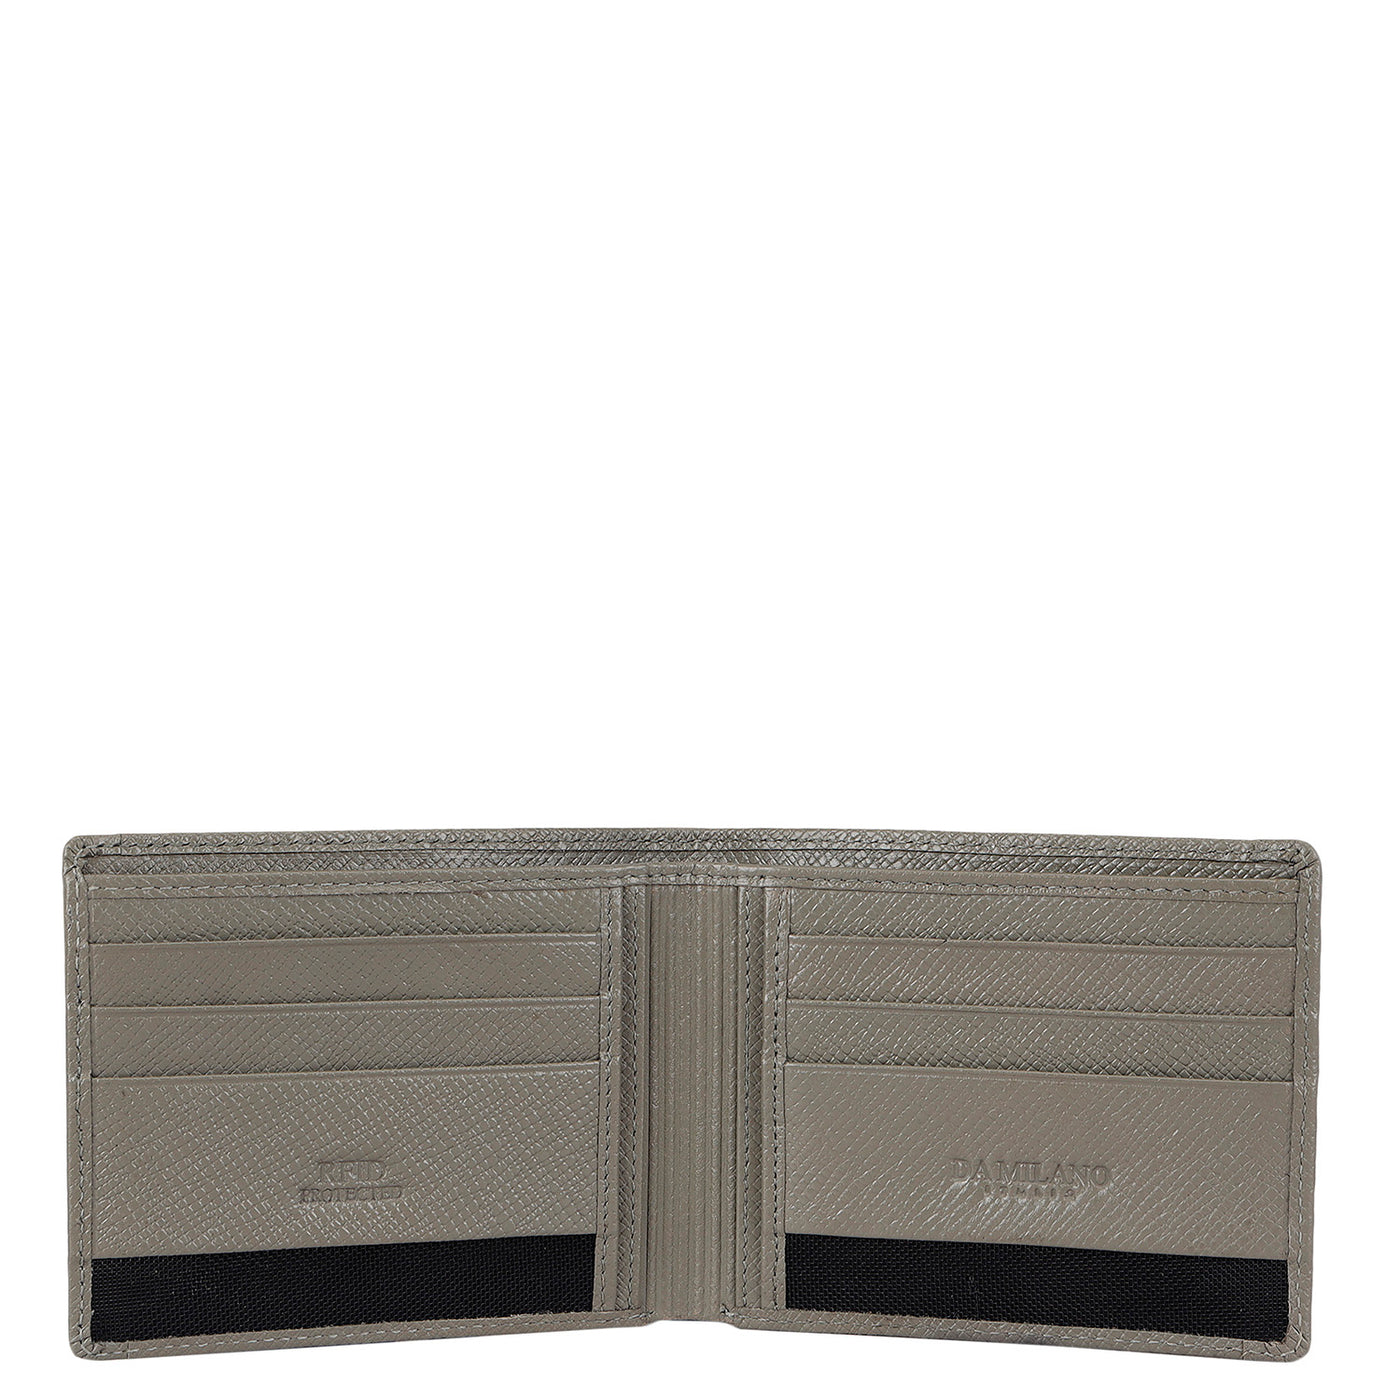 Franzy Croco Leather Mens Wallet - Fossil